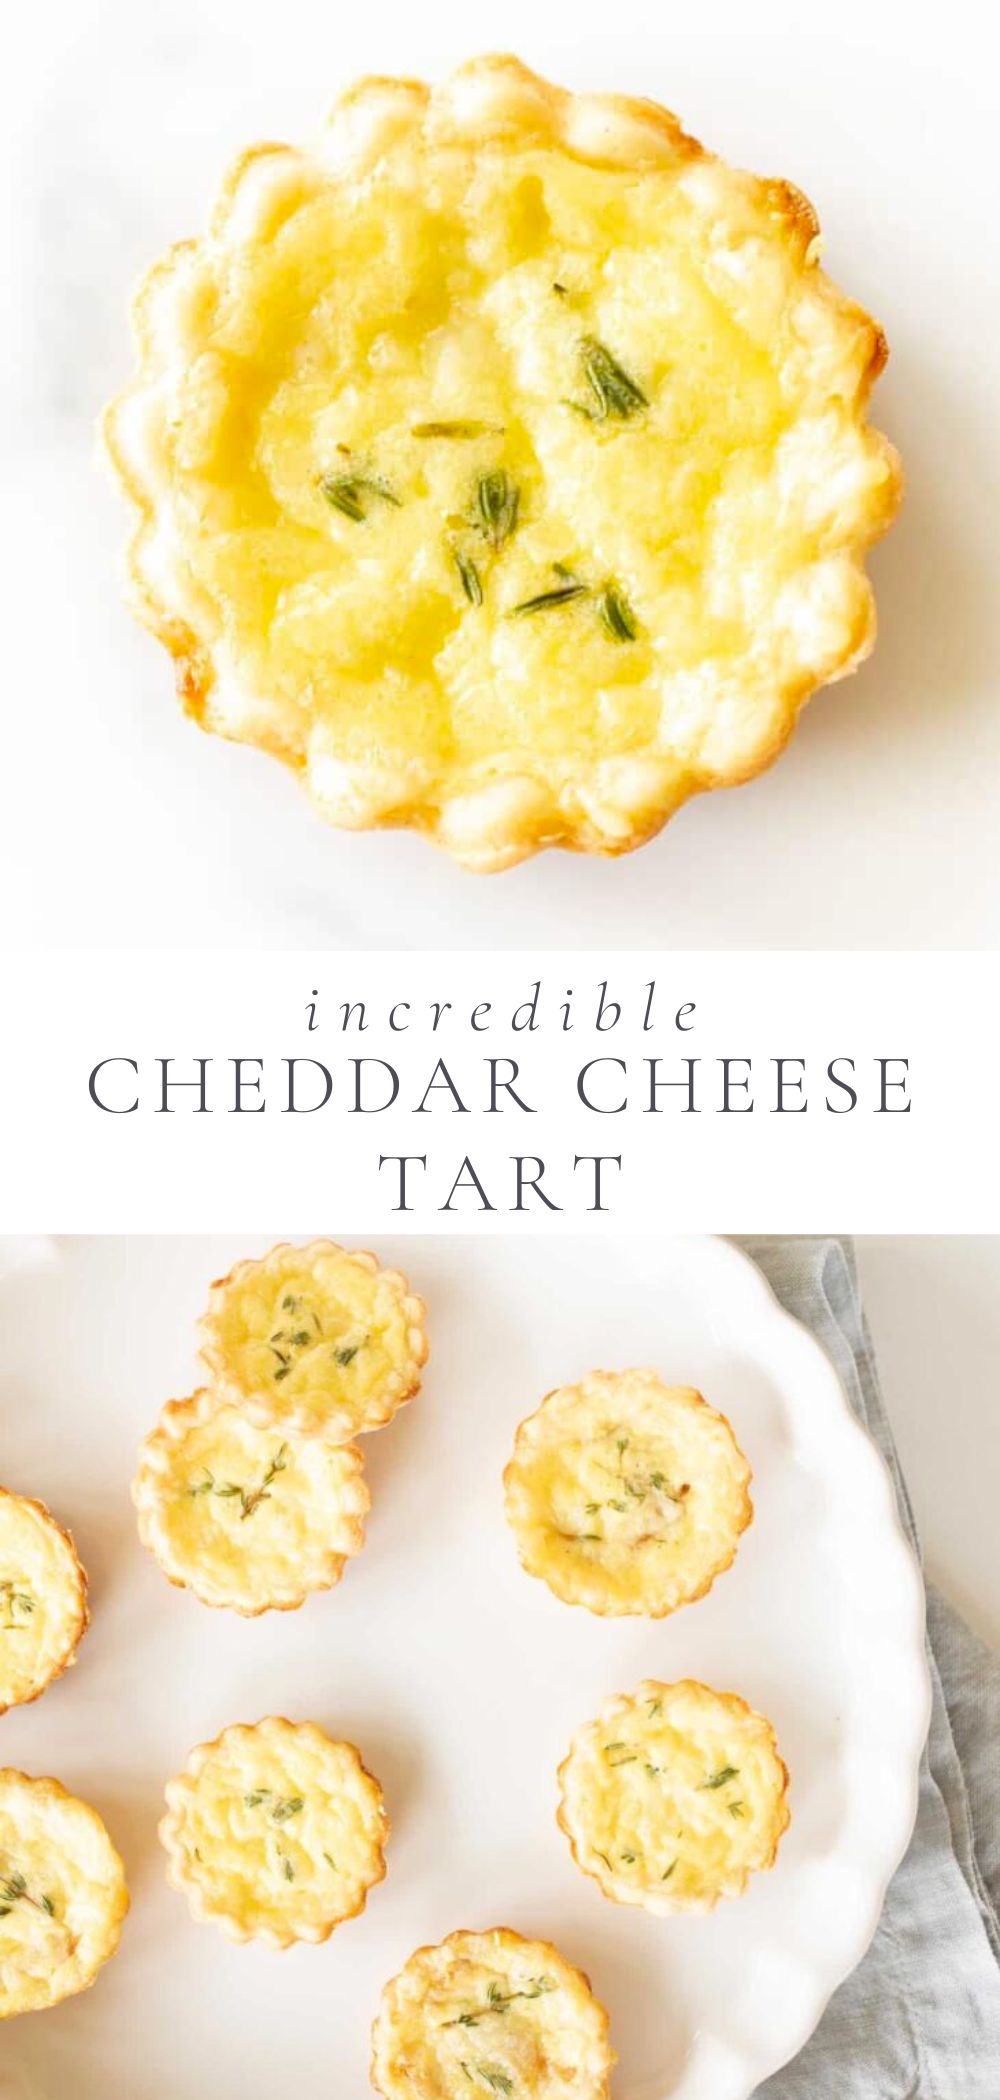 cheddar cheese tart, overlay text, close up of unbaked tart in a muffin tin